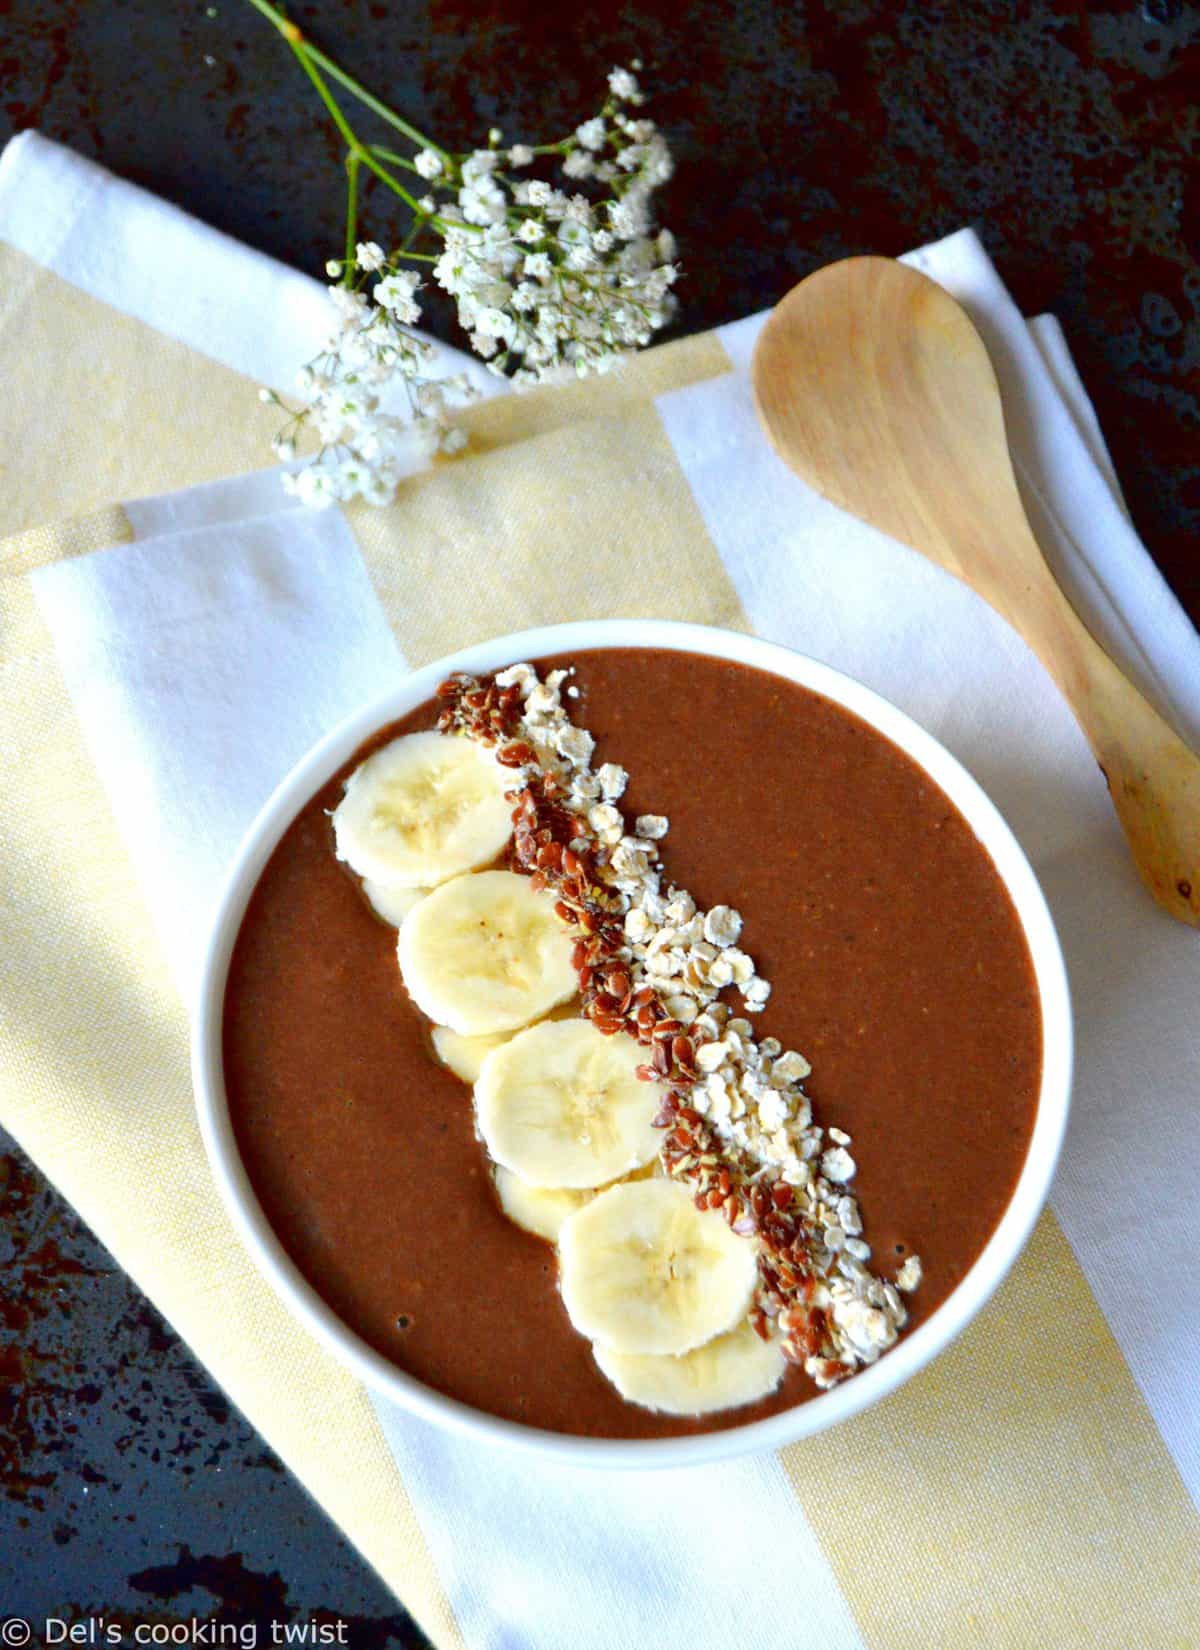 The brown carob powder smoothie bowl topped with bananas and seeds.